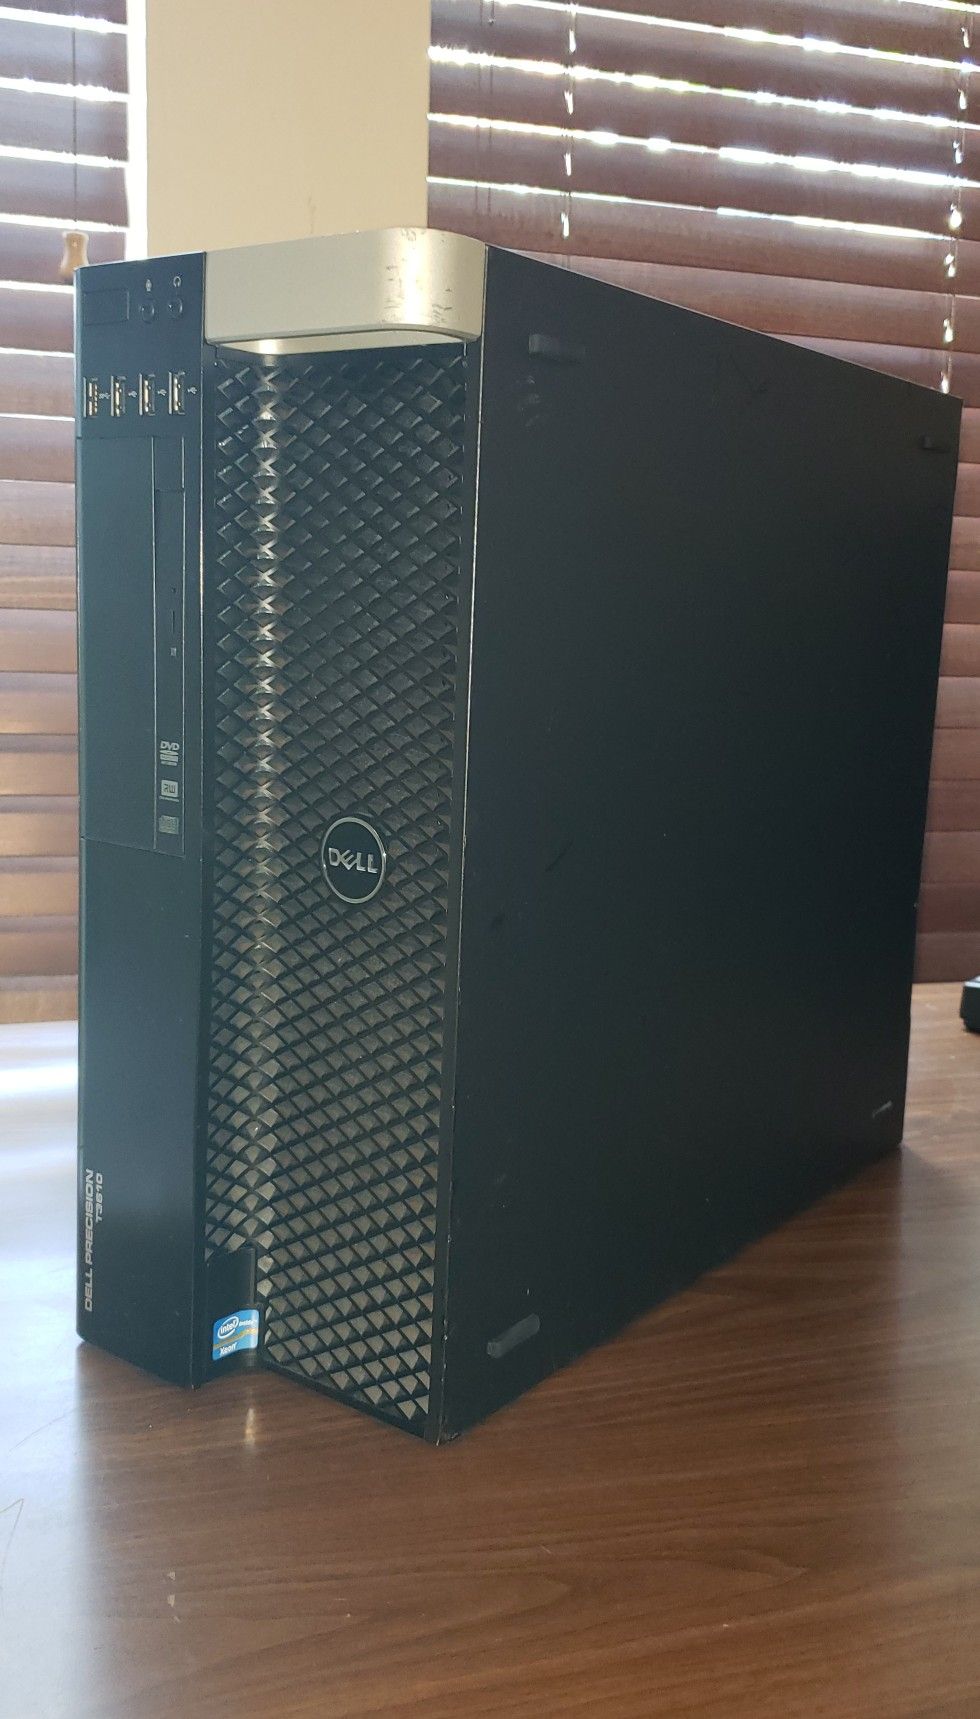 Gaming or Engineering Computer - Dell Precision T3610 - Xeon CPU - 16GB memory - 500GB SSD & 1TB HDD